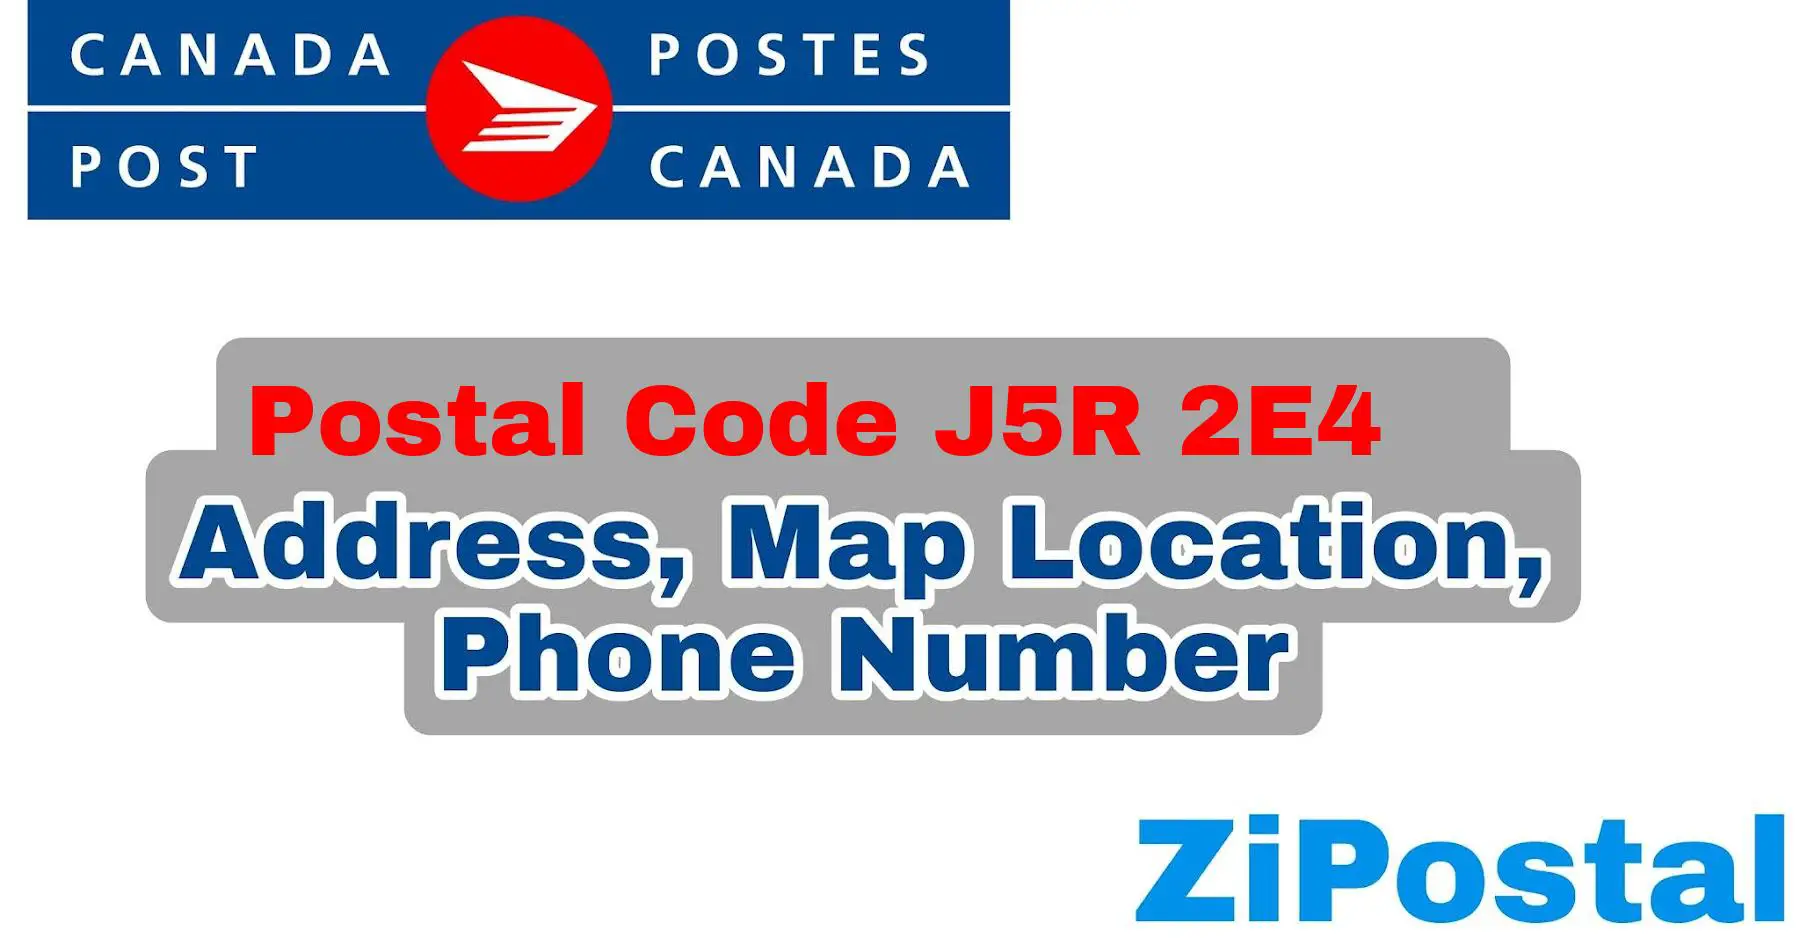 Postal Code J5R 2E4 Address Map Location and Phone Number